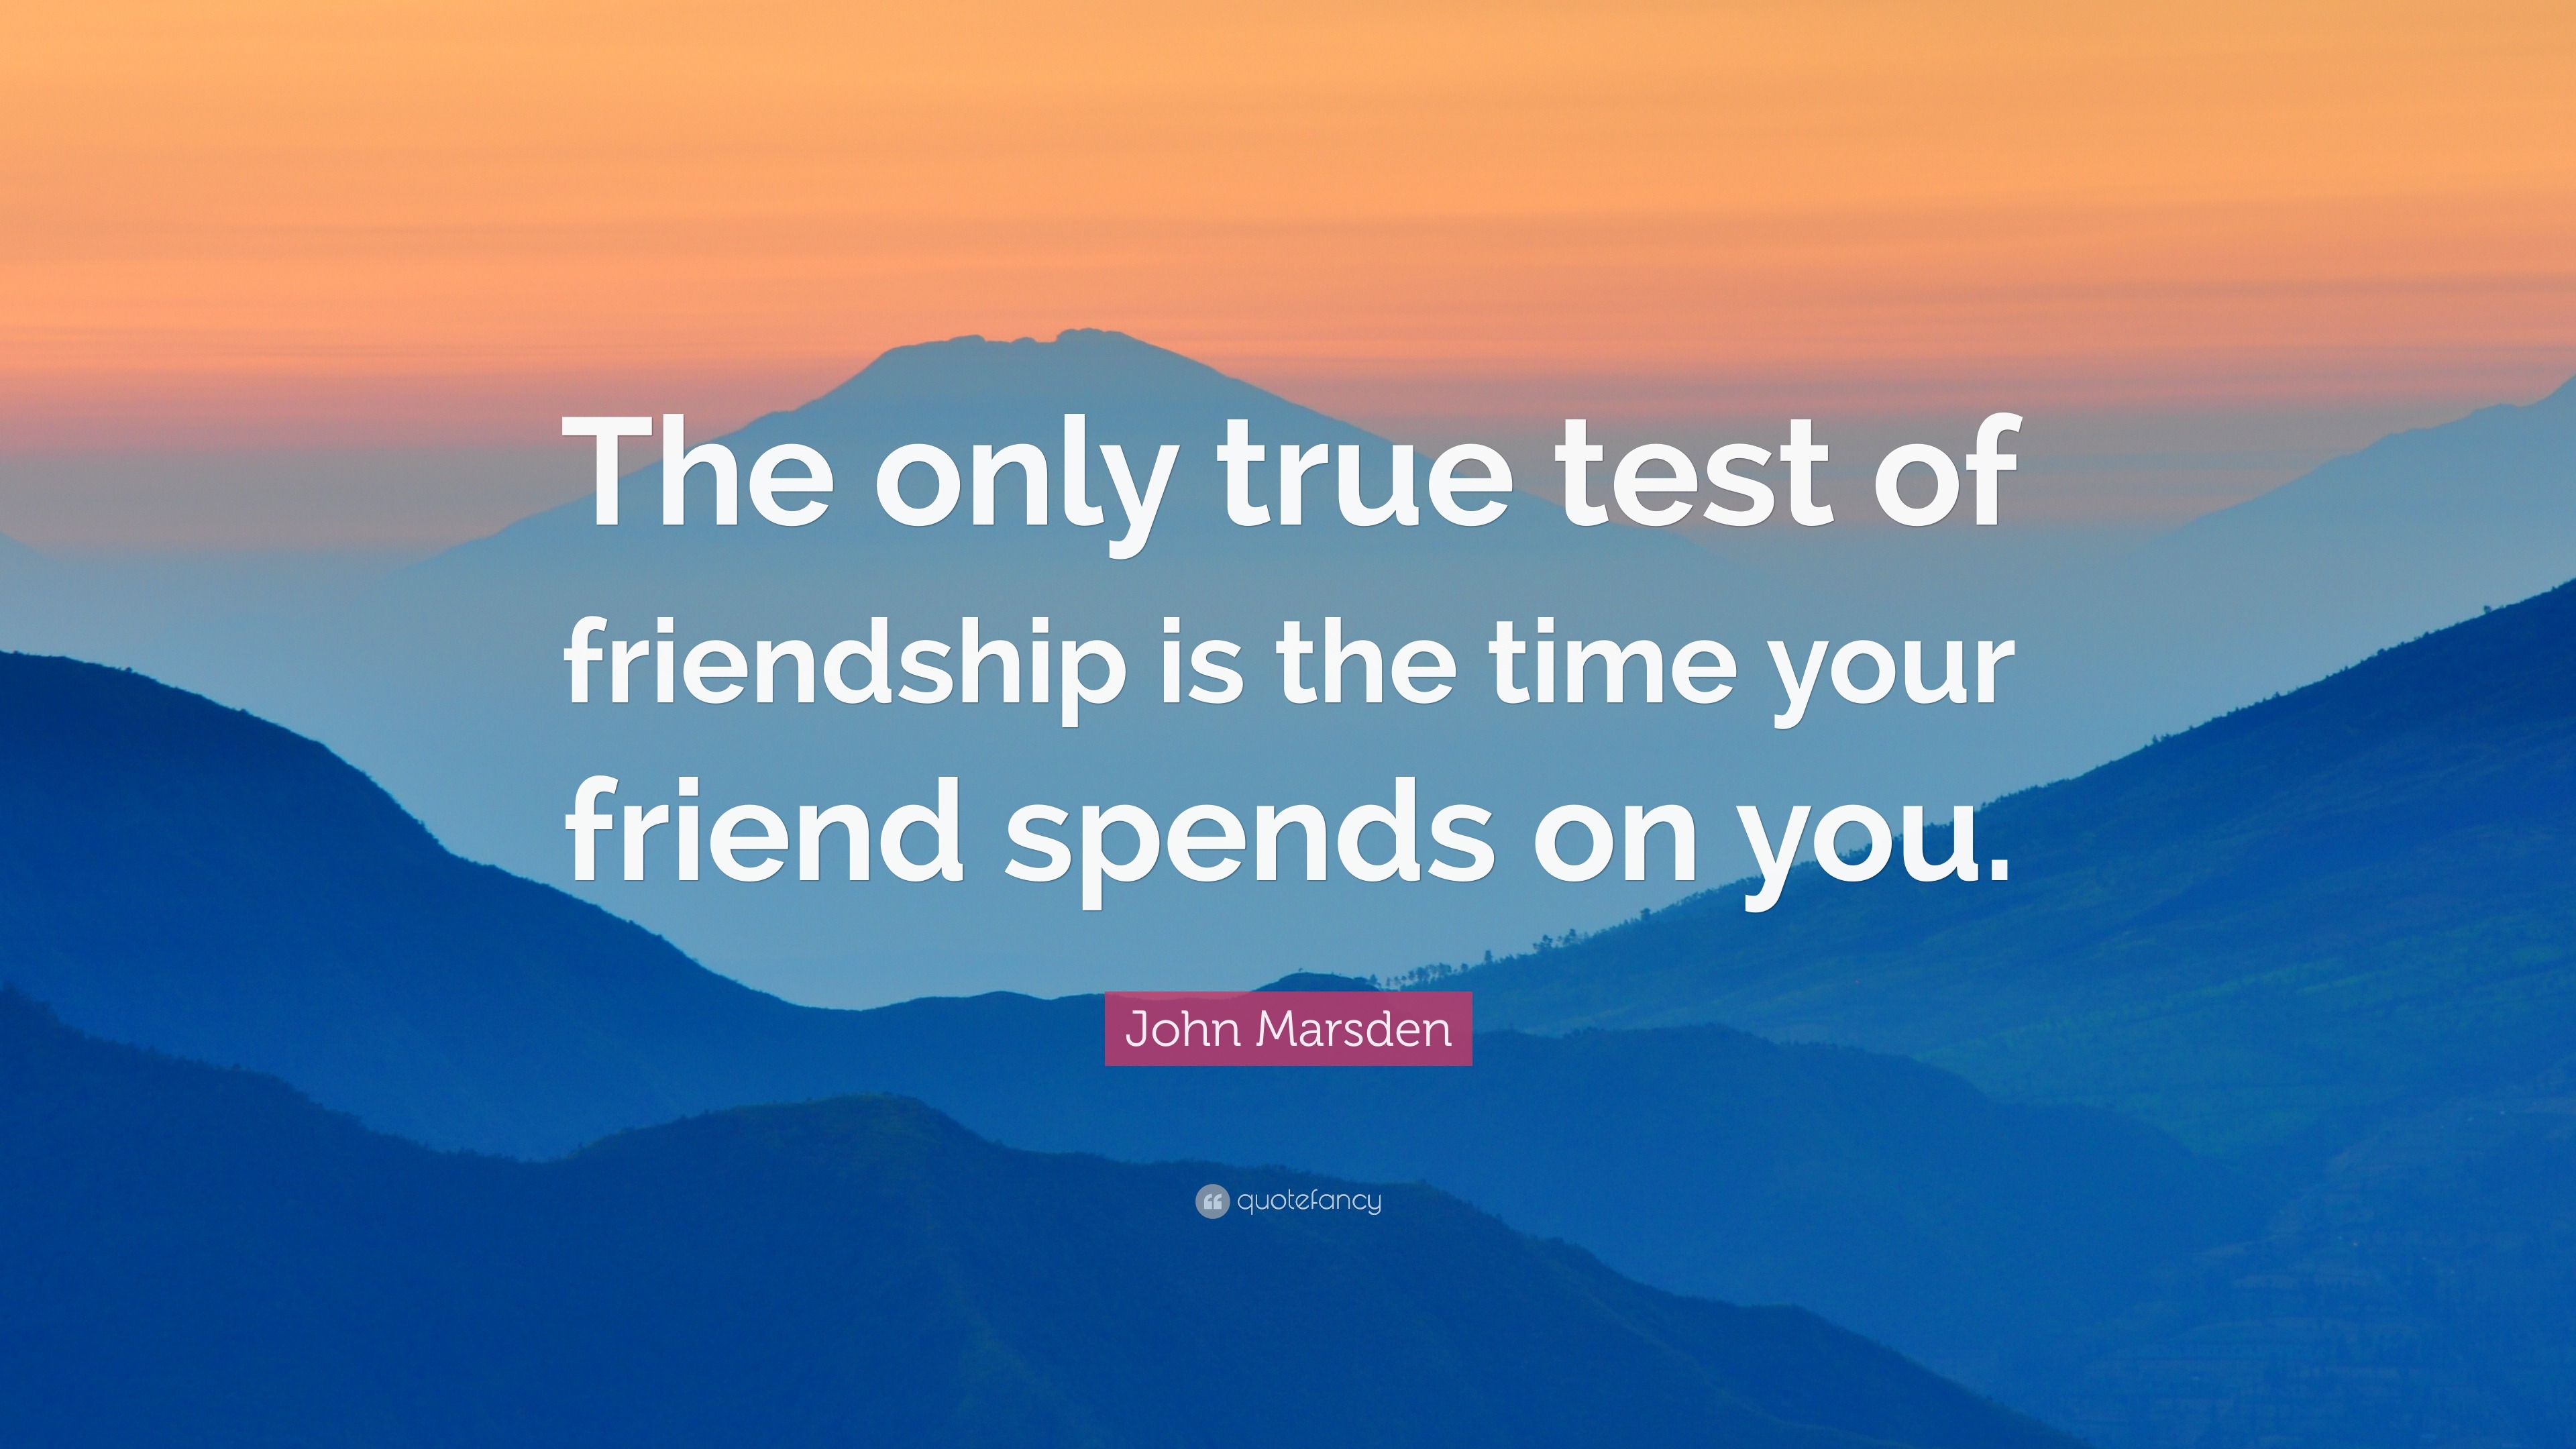 John Marsden Quote: “The only true test of friendship is the time your